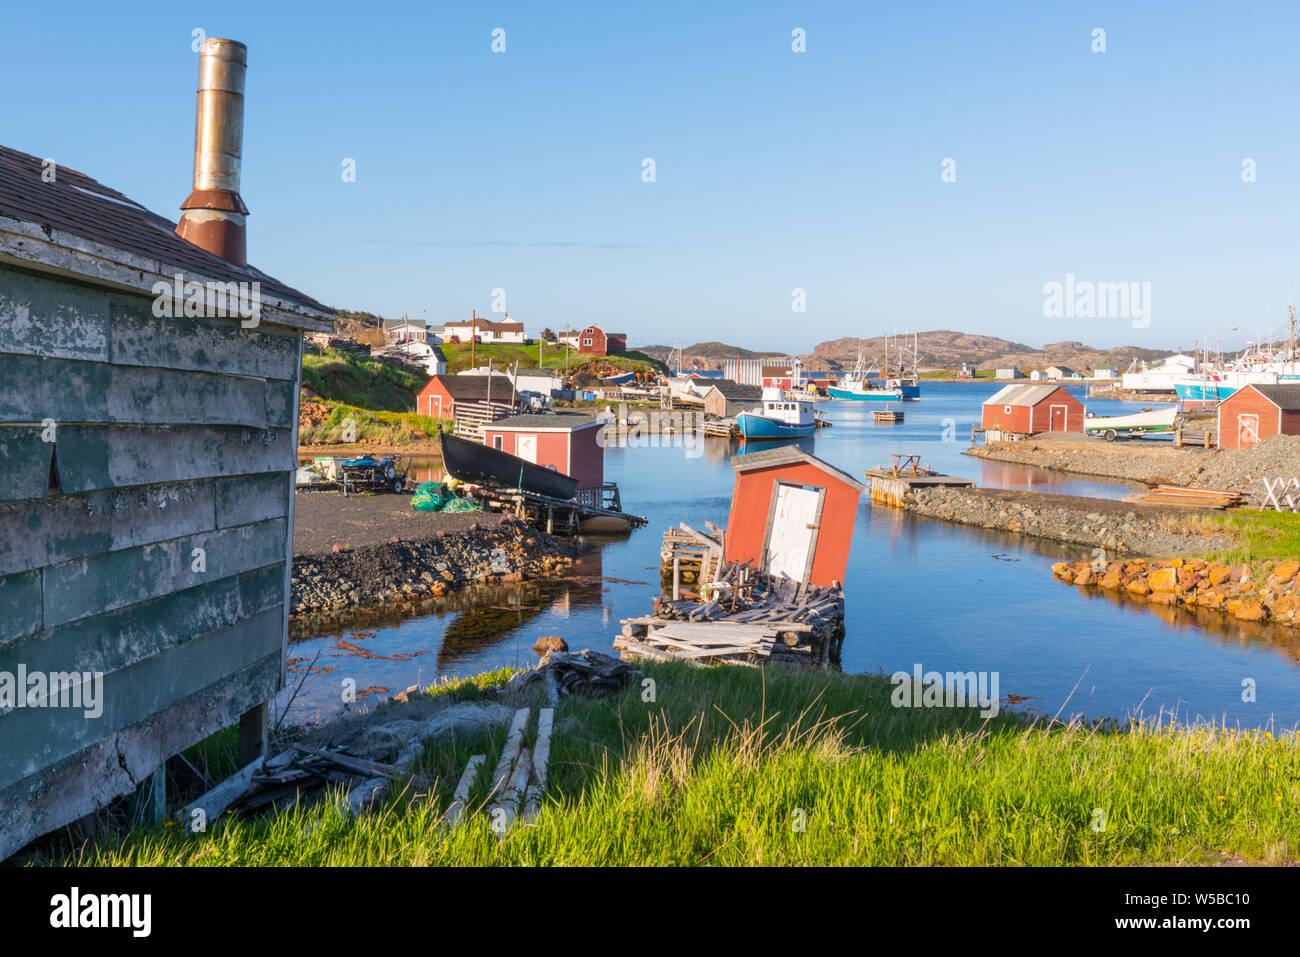 Boats and sheds in the harbor of Farmers Arm near Jenkins Cove, Newfoundland, Canada Stock Photo